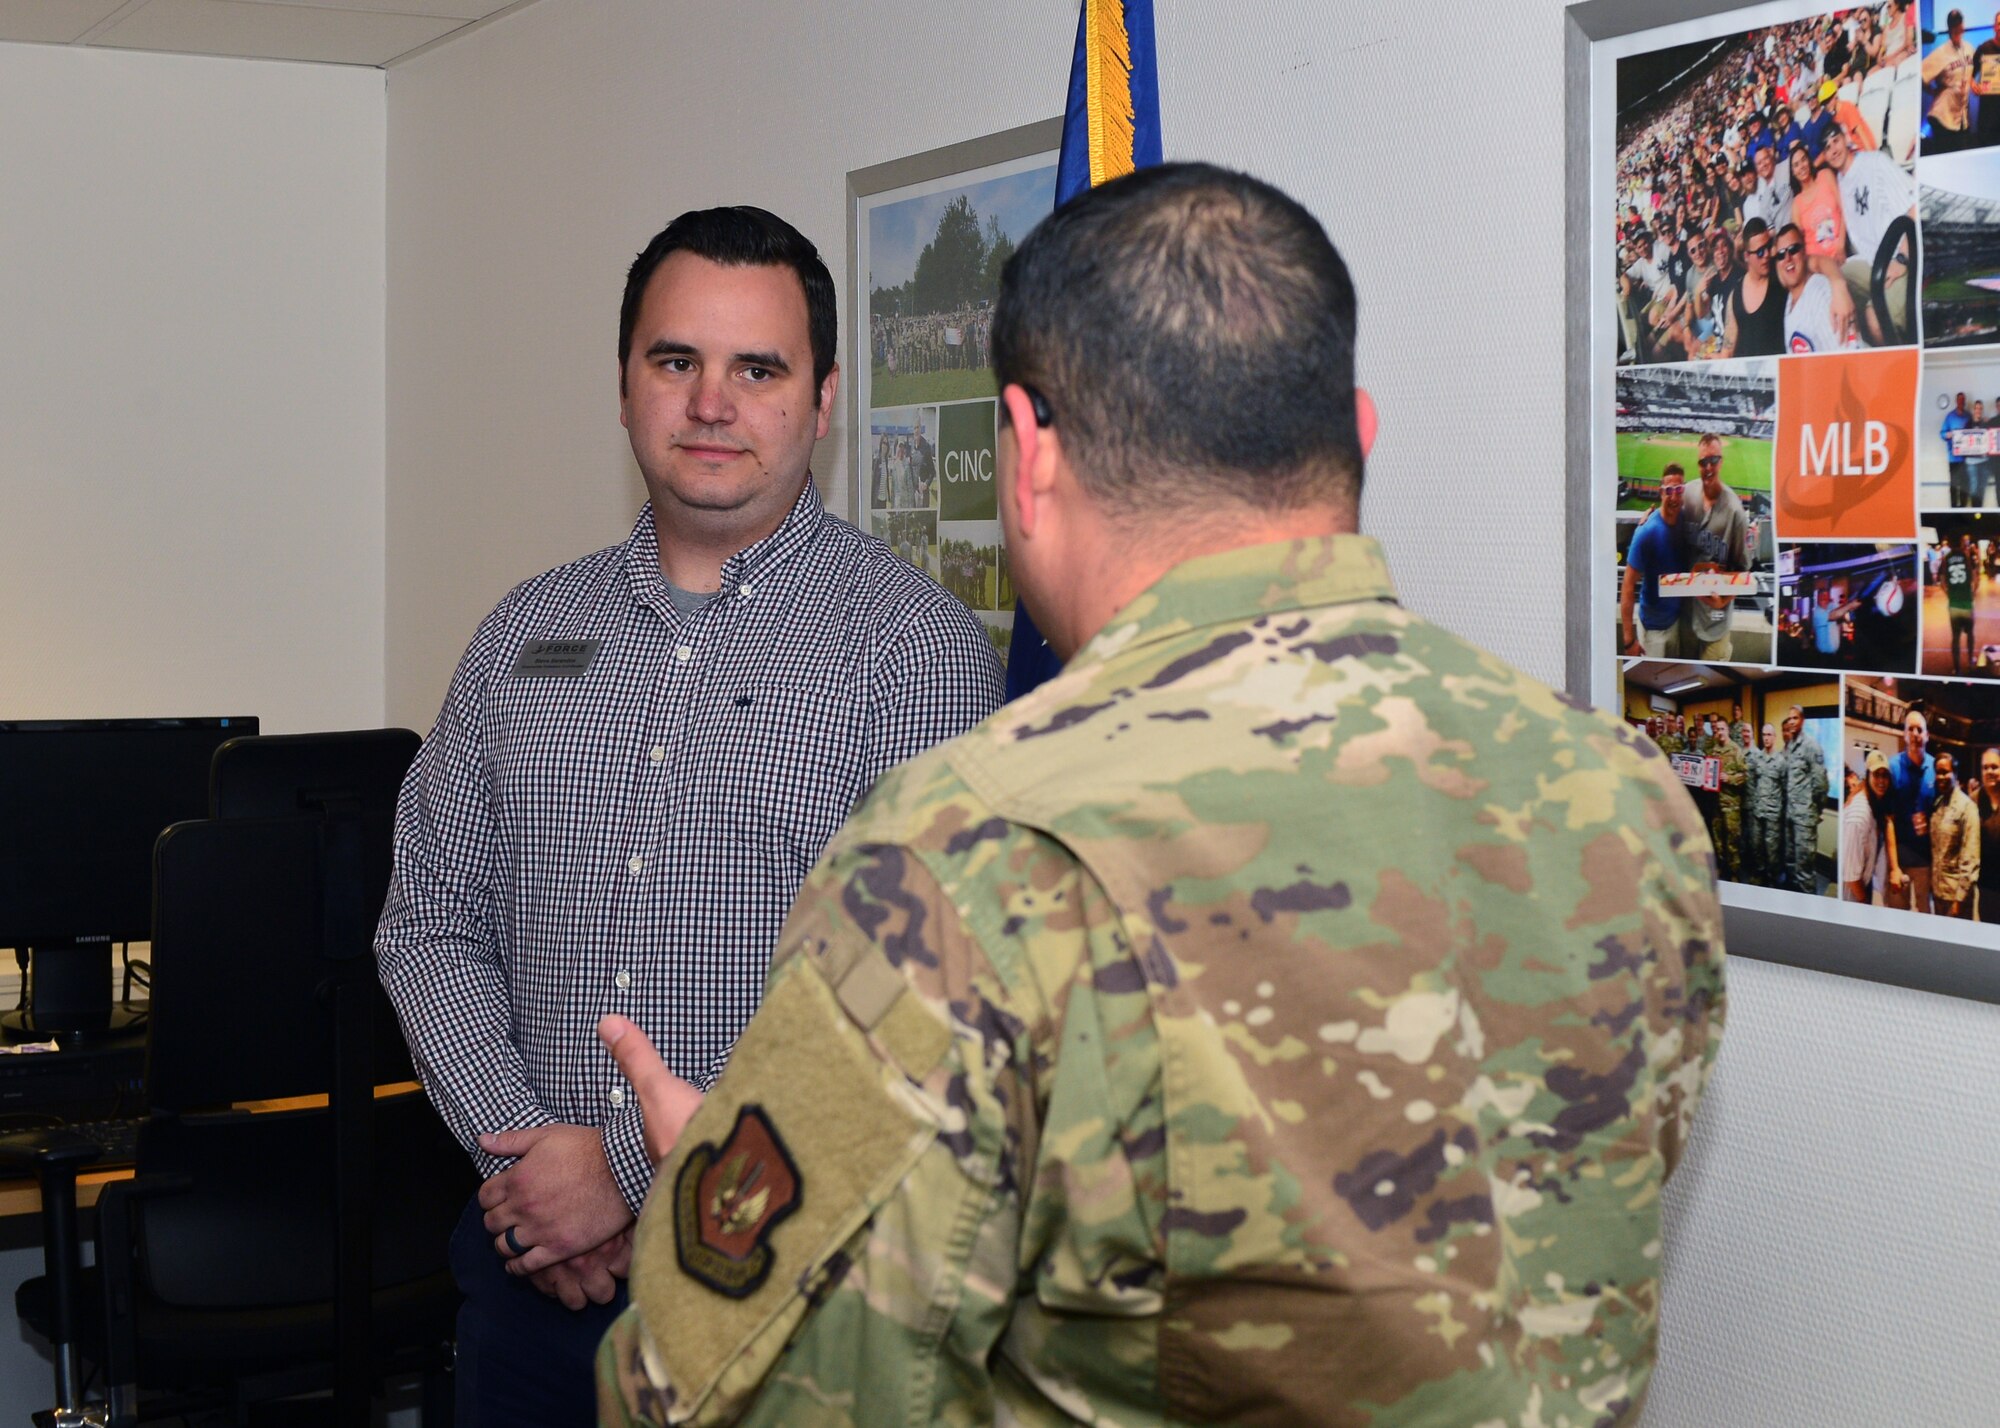 U.S. Air Force Chief Master Sgt. Ernesto J. Rendon, 86th Airlift Wing command chief, recognizes Steven Sarandos, 86th Force Support Squadron community cohesion coordinator, for his efforts in rolling out the Chief of Staff of the Air Force’s Unite program on Ramstein Air Base, Germany, Oct. 2, 2019. The Unite program provides commanders with funding for initiatives to benefit all Airmen. (U.S. Air Force photo by Staff Sgt. Jimmie D. Pike)